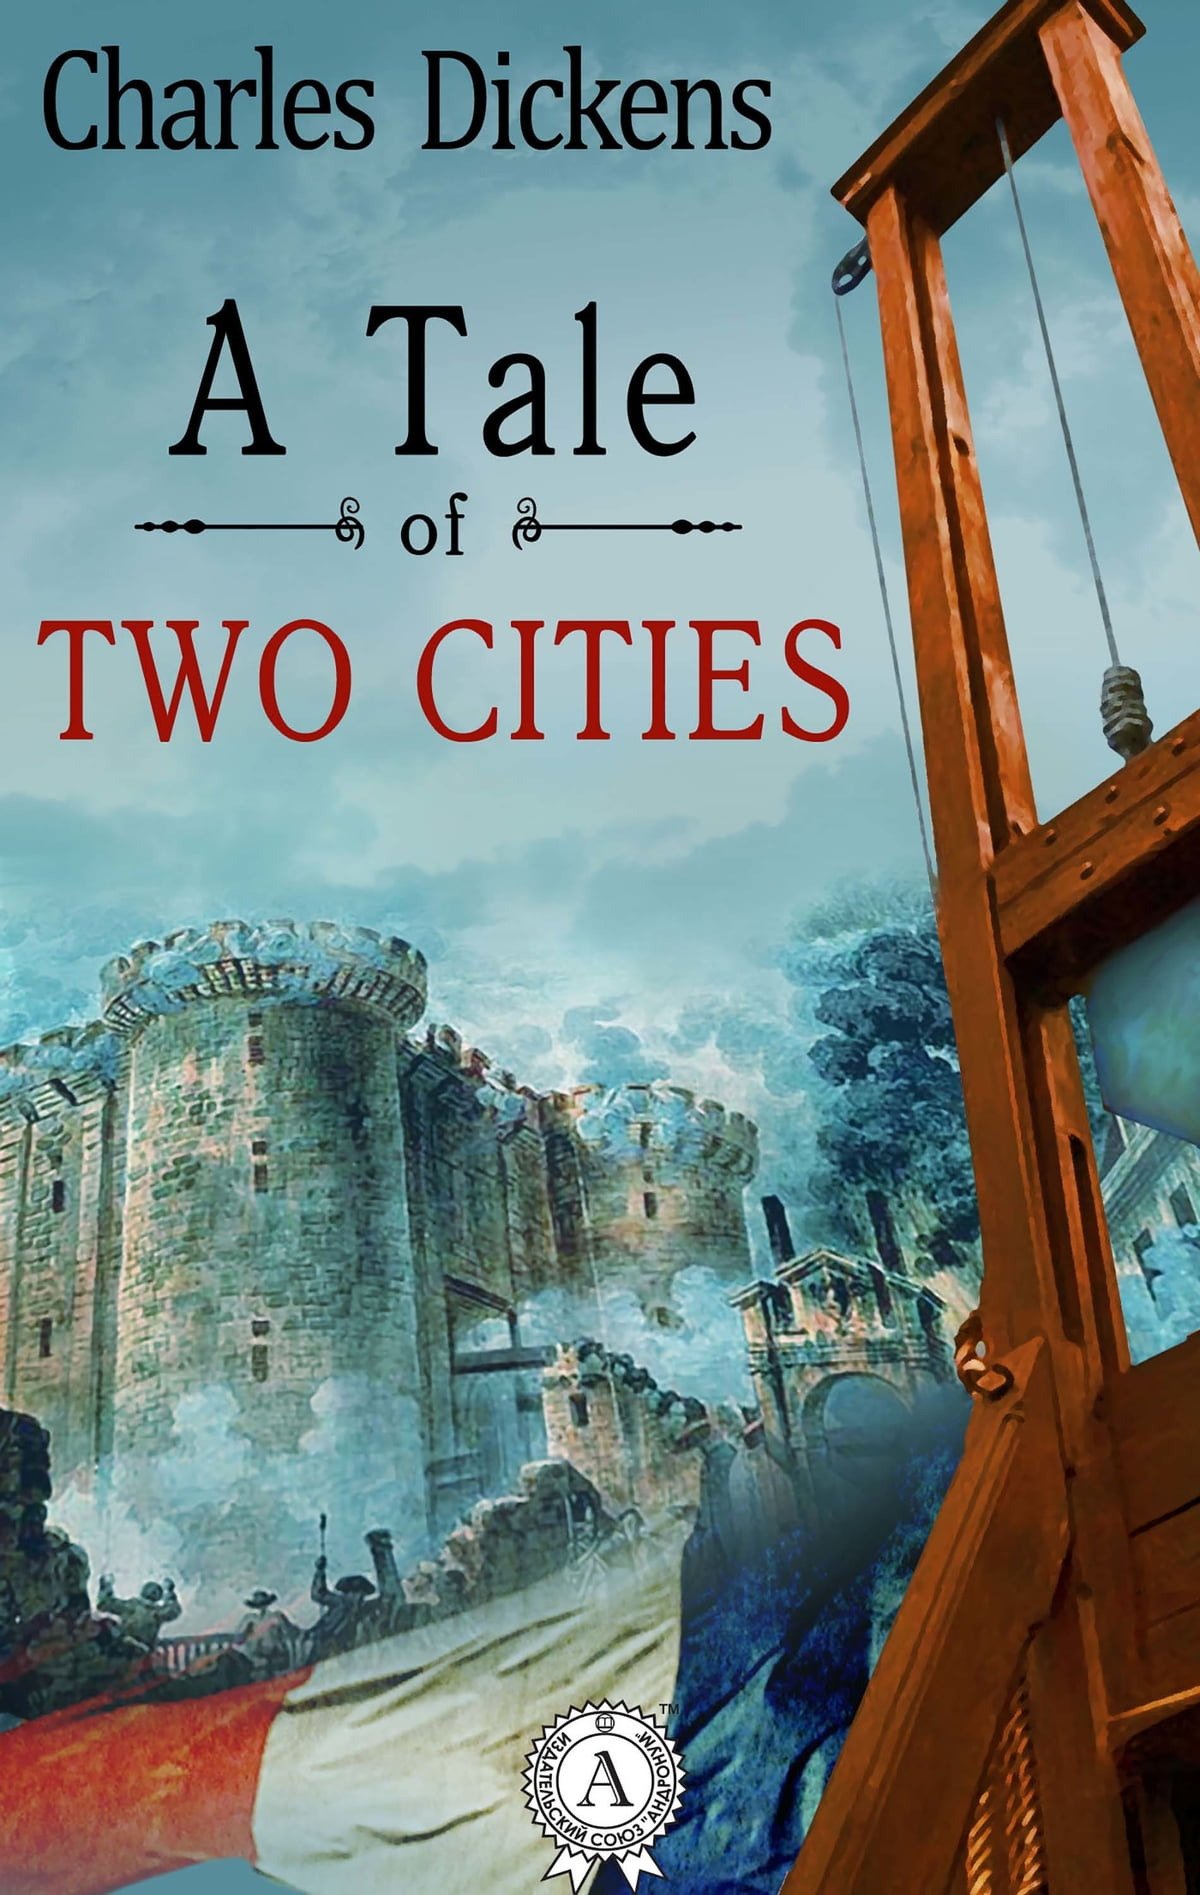 Book Review: A Tale of Two Cities